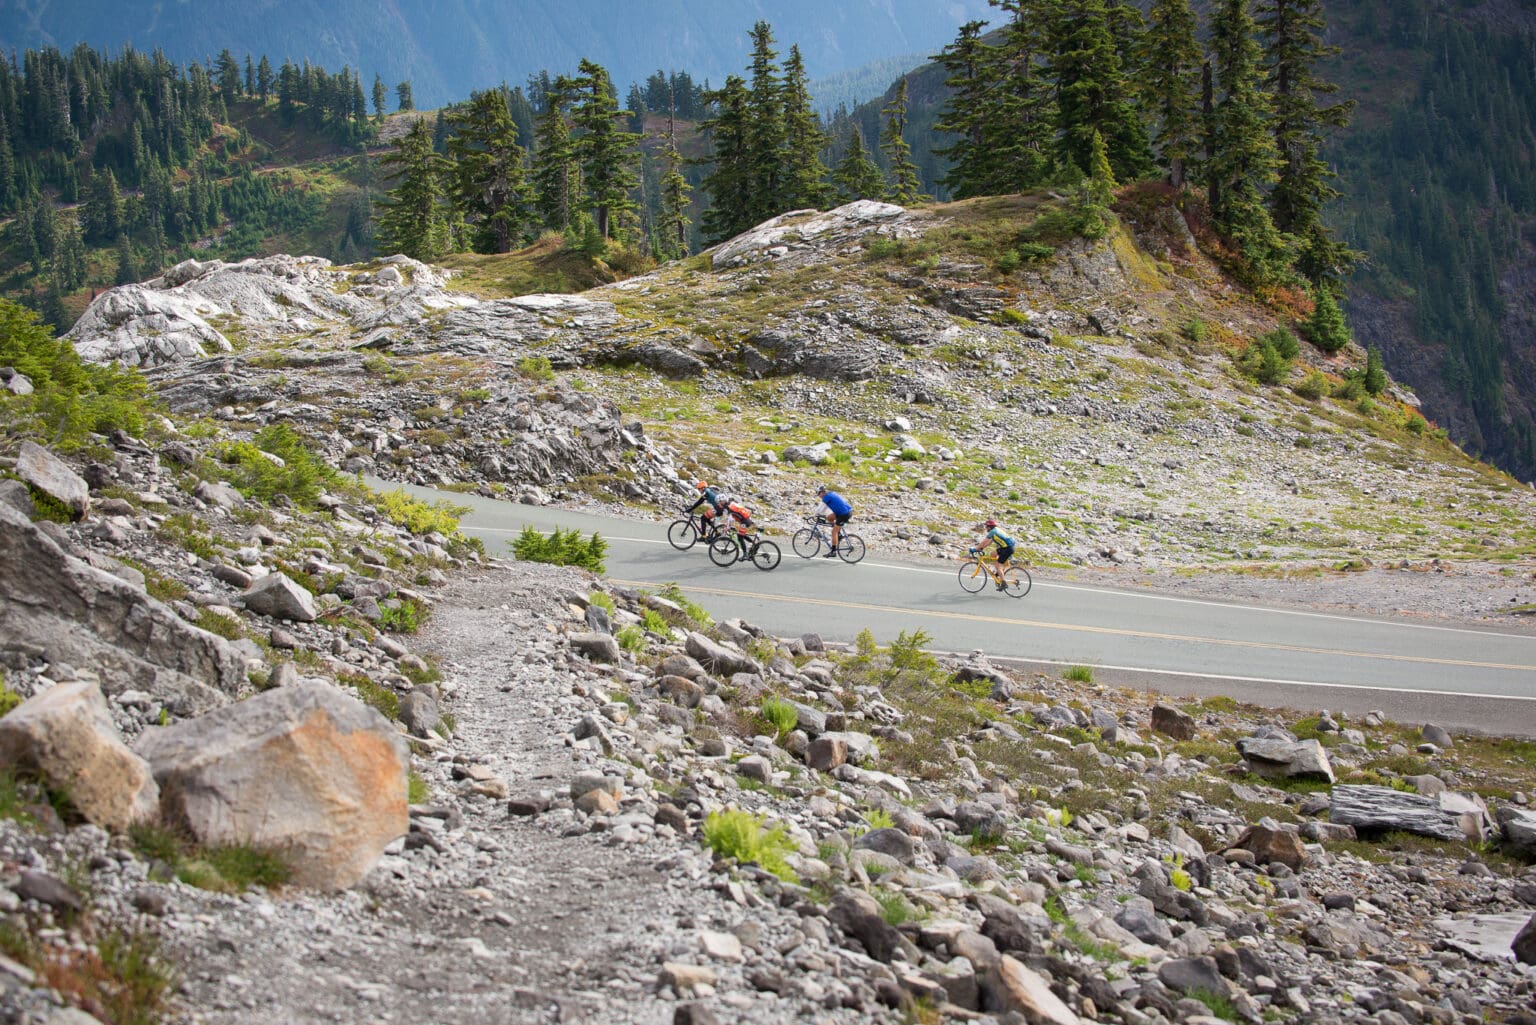 Riders push up Mount Baker Highway surrounded by rocks.